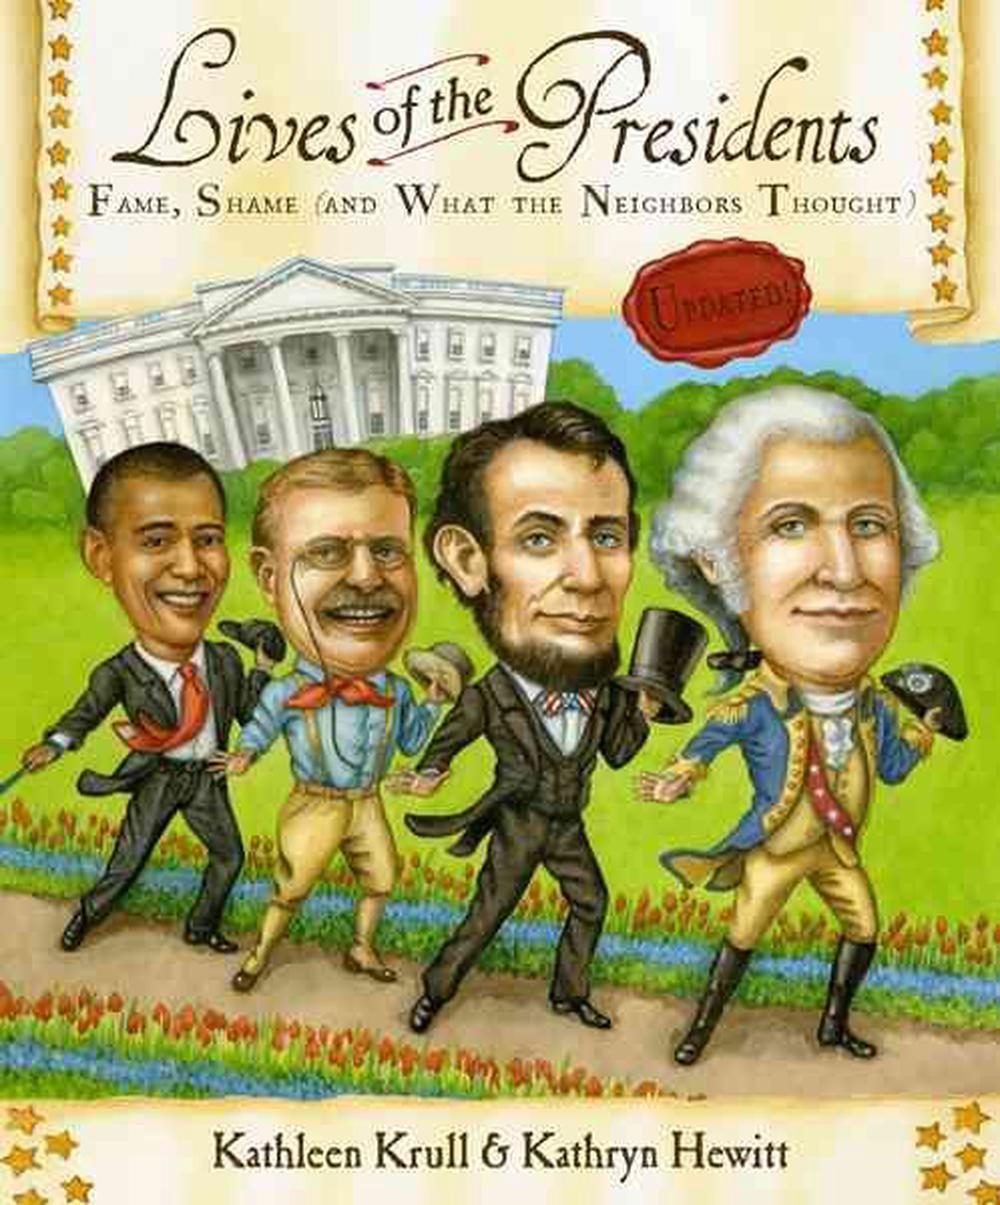 Lives of the Presidents Fame, Shame (and What the Neighbors Thought) by Kathlee 9780547498096